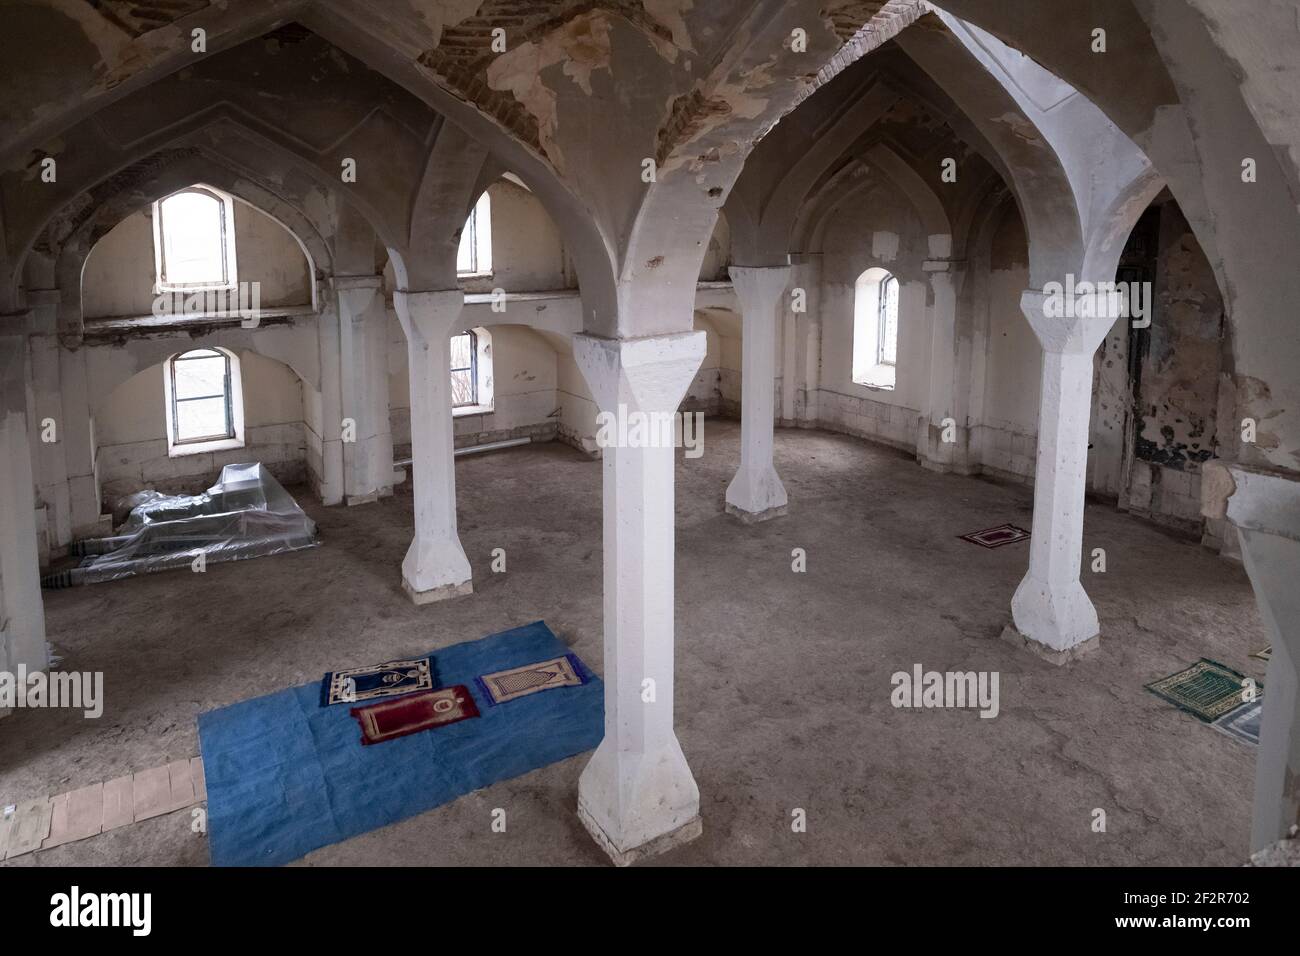 AGDAM, AZERBAIJAN - DECEMBER 14: Personal prayer mats spread inside the neglected and partially destroyed 19th century Juma Mosque the only building left standing in the town of Agdam which was destroyed by Armenian forces during the First Nagorno-Karabakh War on December 14, 2020 in Agdam, Azerbaijan. The town and its surrounding district were returned to Azerbaijani control as part of an agreement that ended the 2020 Nagorno-Karabakh War. Stock Photo